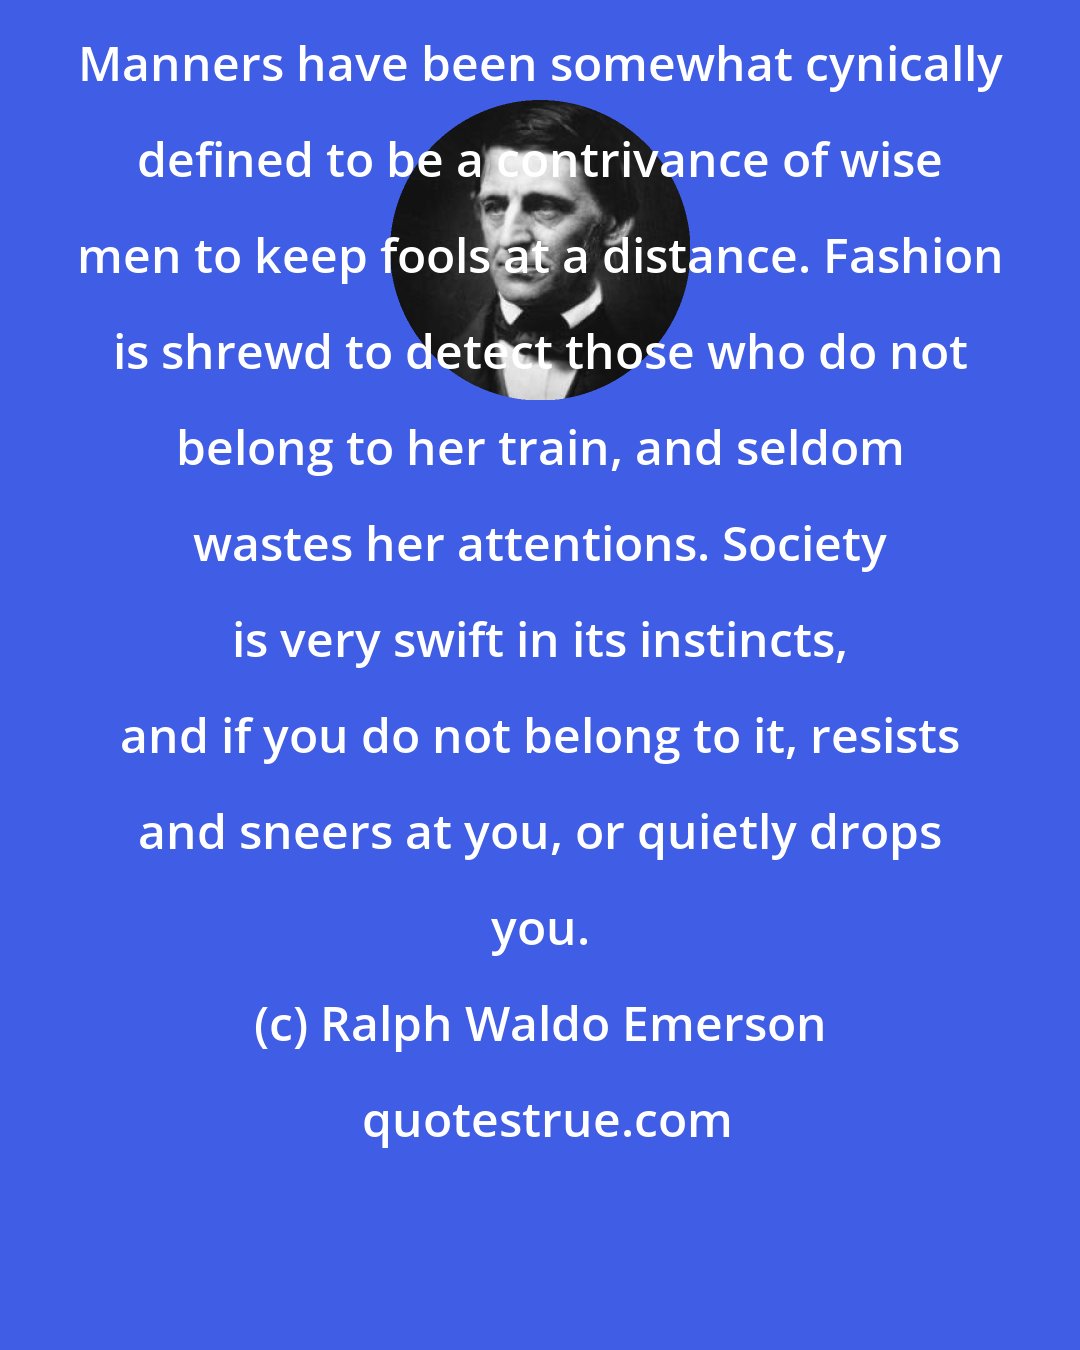 Ralph Waldo Emerson: Manners have been somewhat cynically defined to be a contrivance of wise men to keep fools at a distance. Fashion is shrewd to detect those who do not belong to her train, and seldom wastes her attentions. Society is very swift in its instincts, and if you do not belong to it, resists and sneers at you, or quietly drops you.